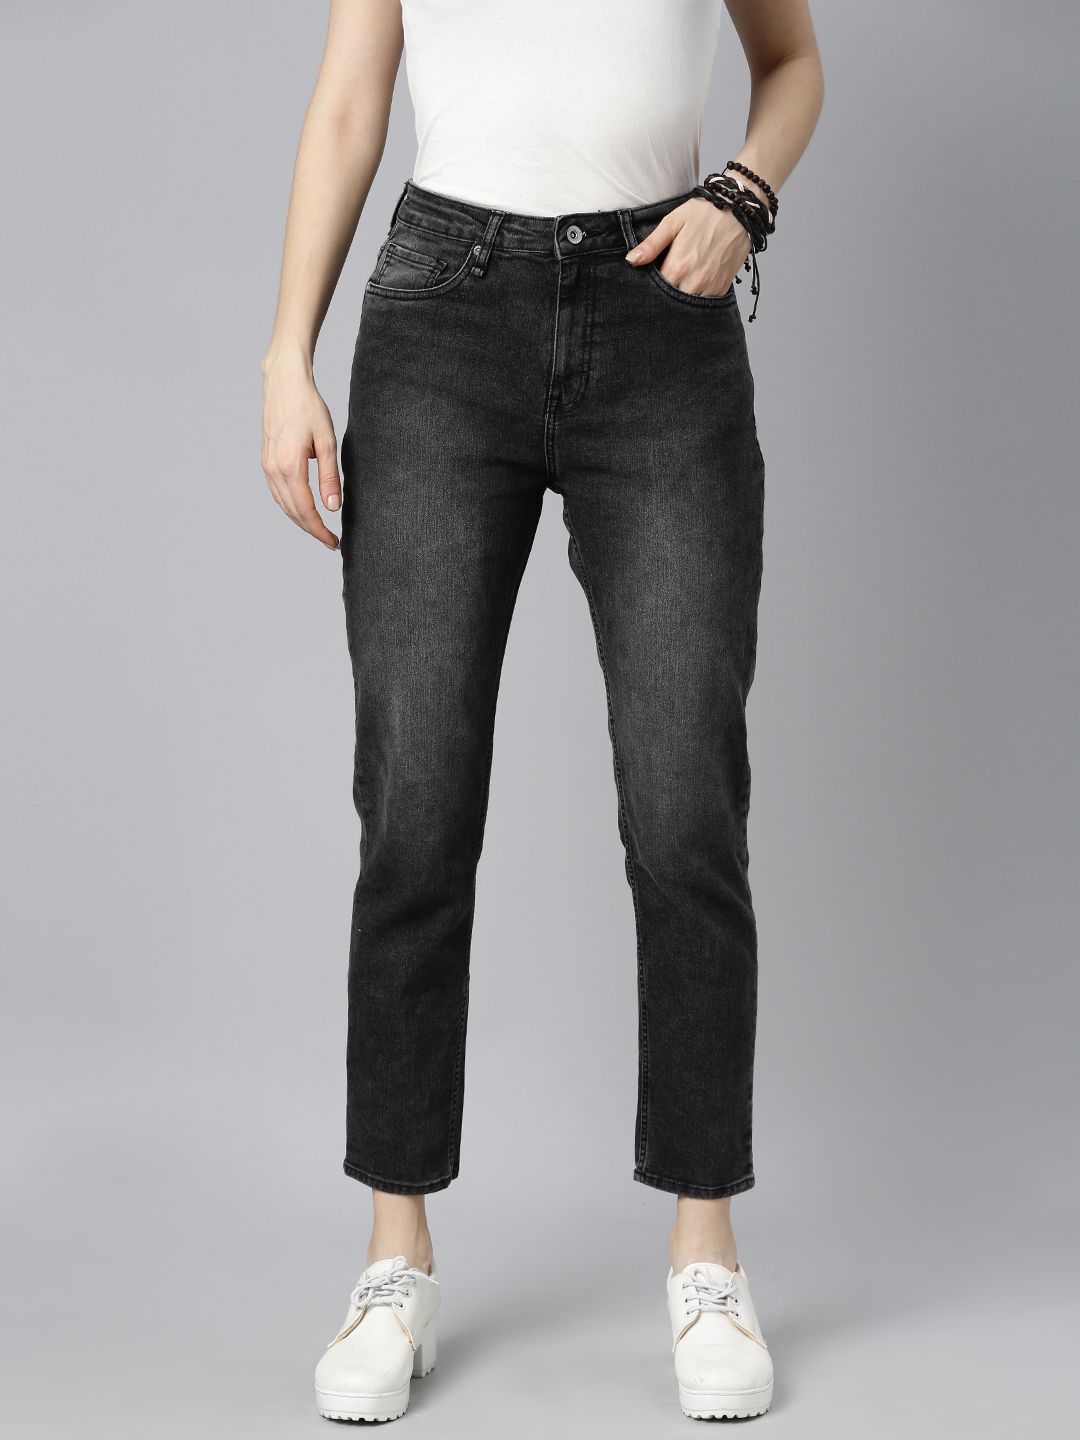 The Roadster Lifestyle Co Women Black Slim Fit Mid-Rise Clean Look Stretchable Jeans Price in India